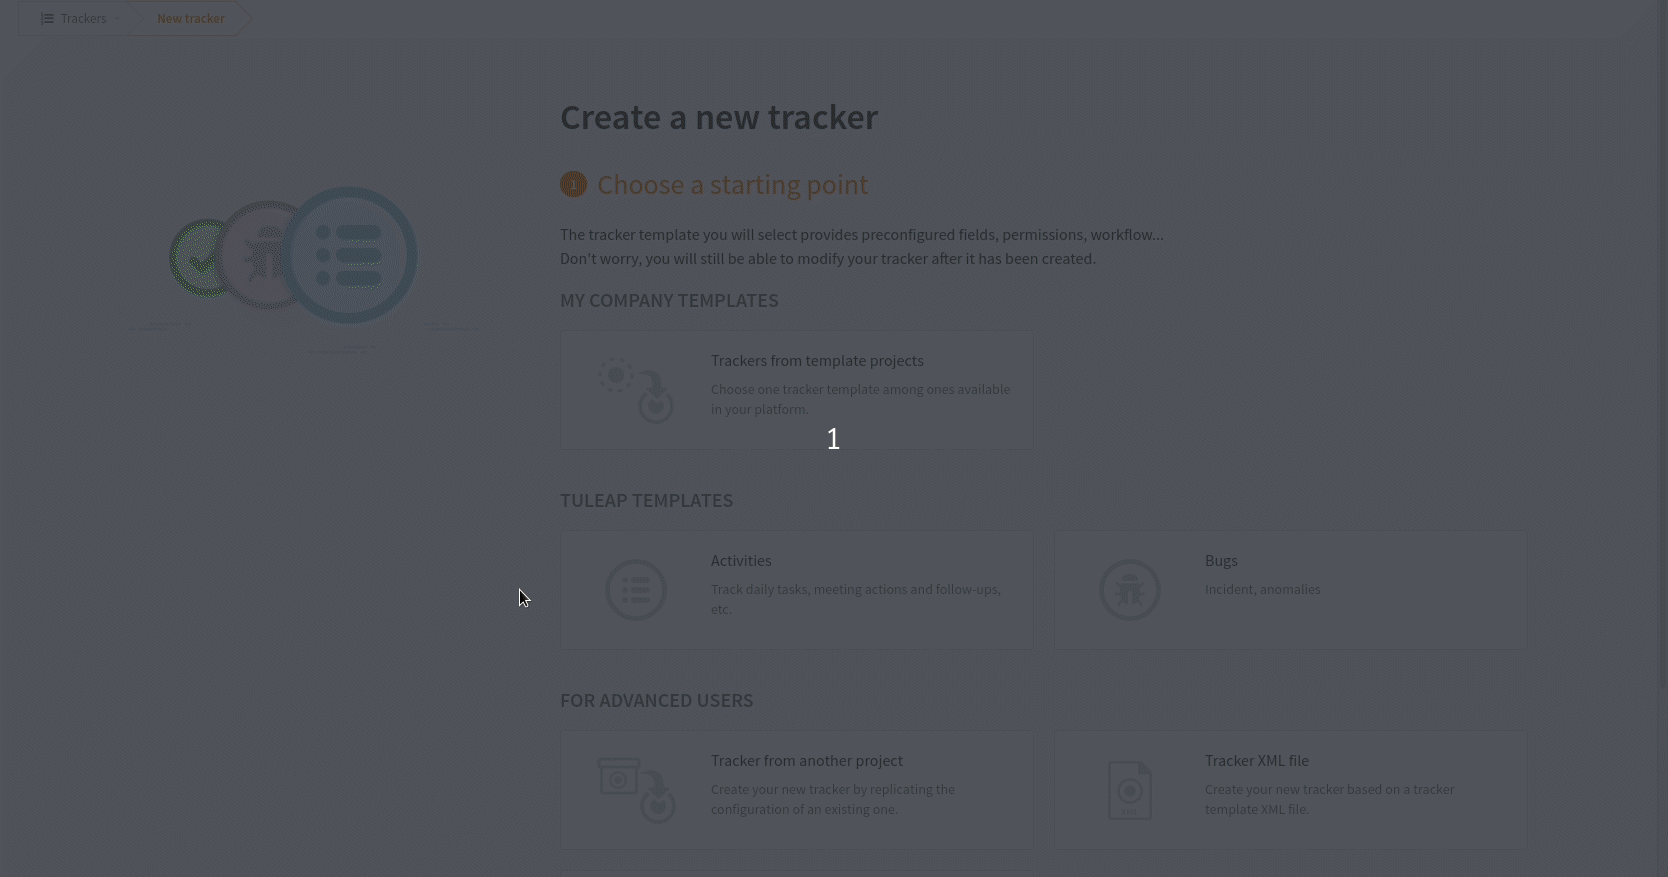 How to create a new tracker